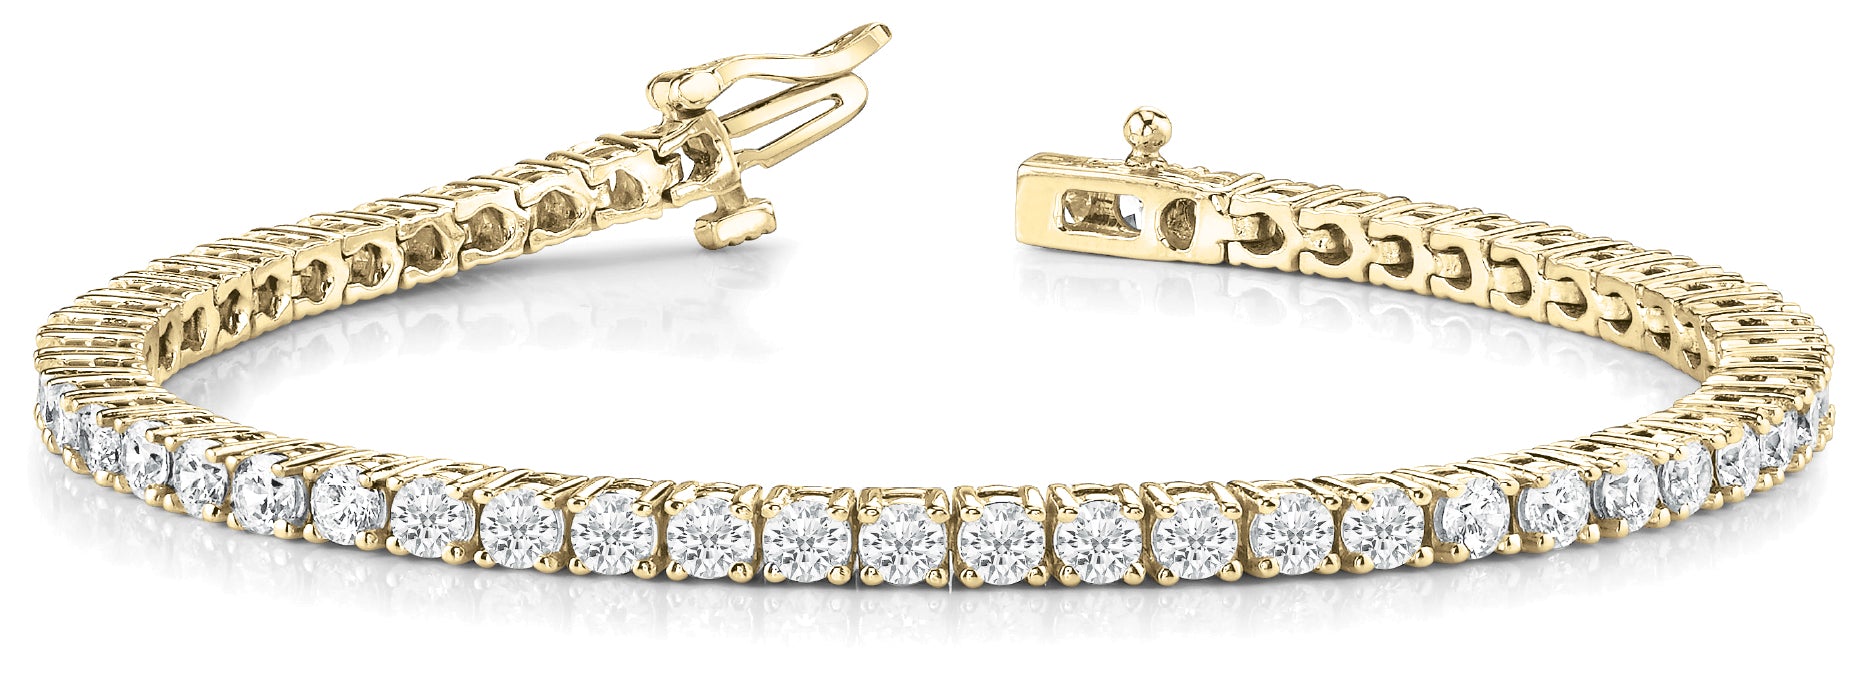 Tennis Bracelet - The Trendy Accessory You Need to Know About – Savransky  Private Jeweler